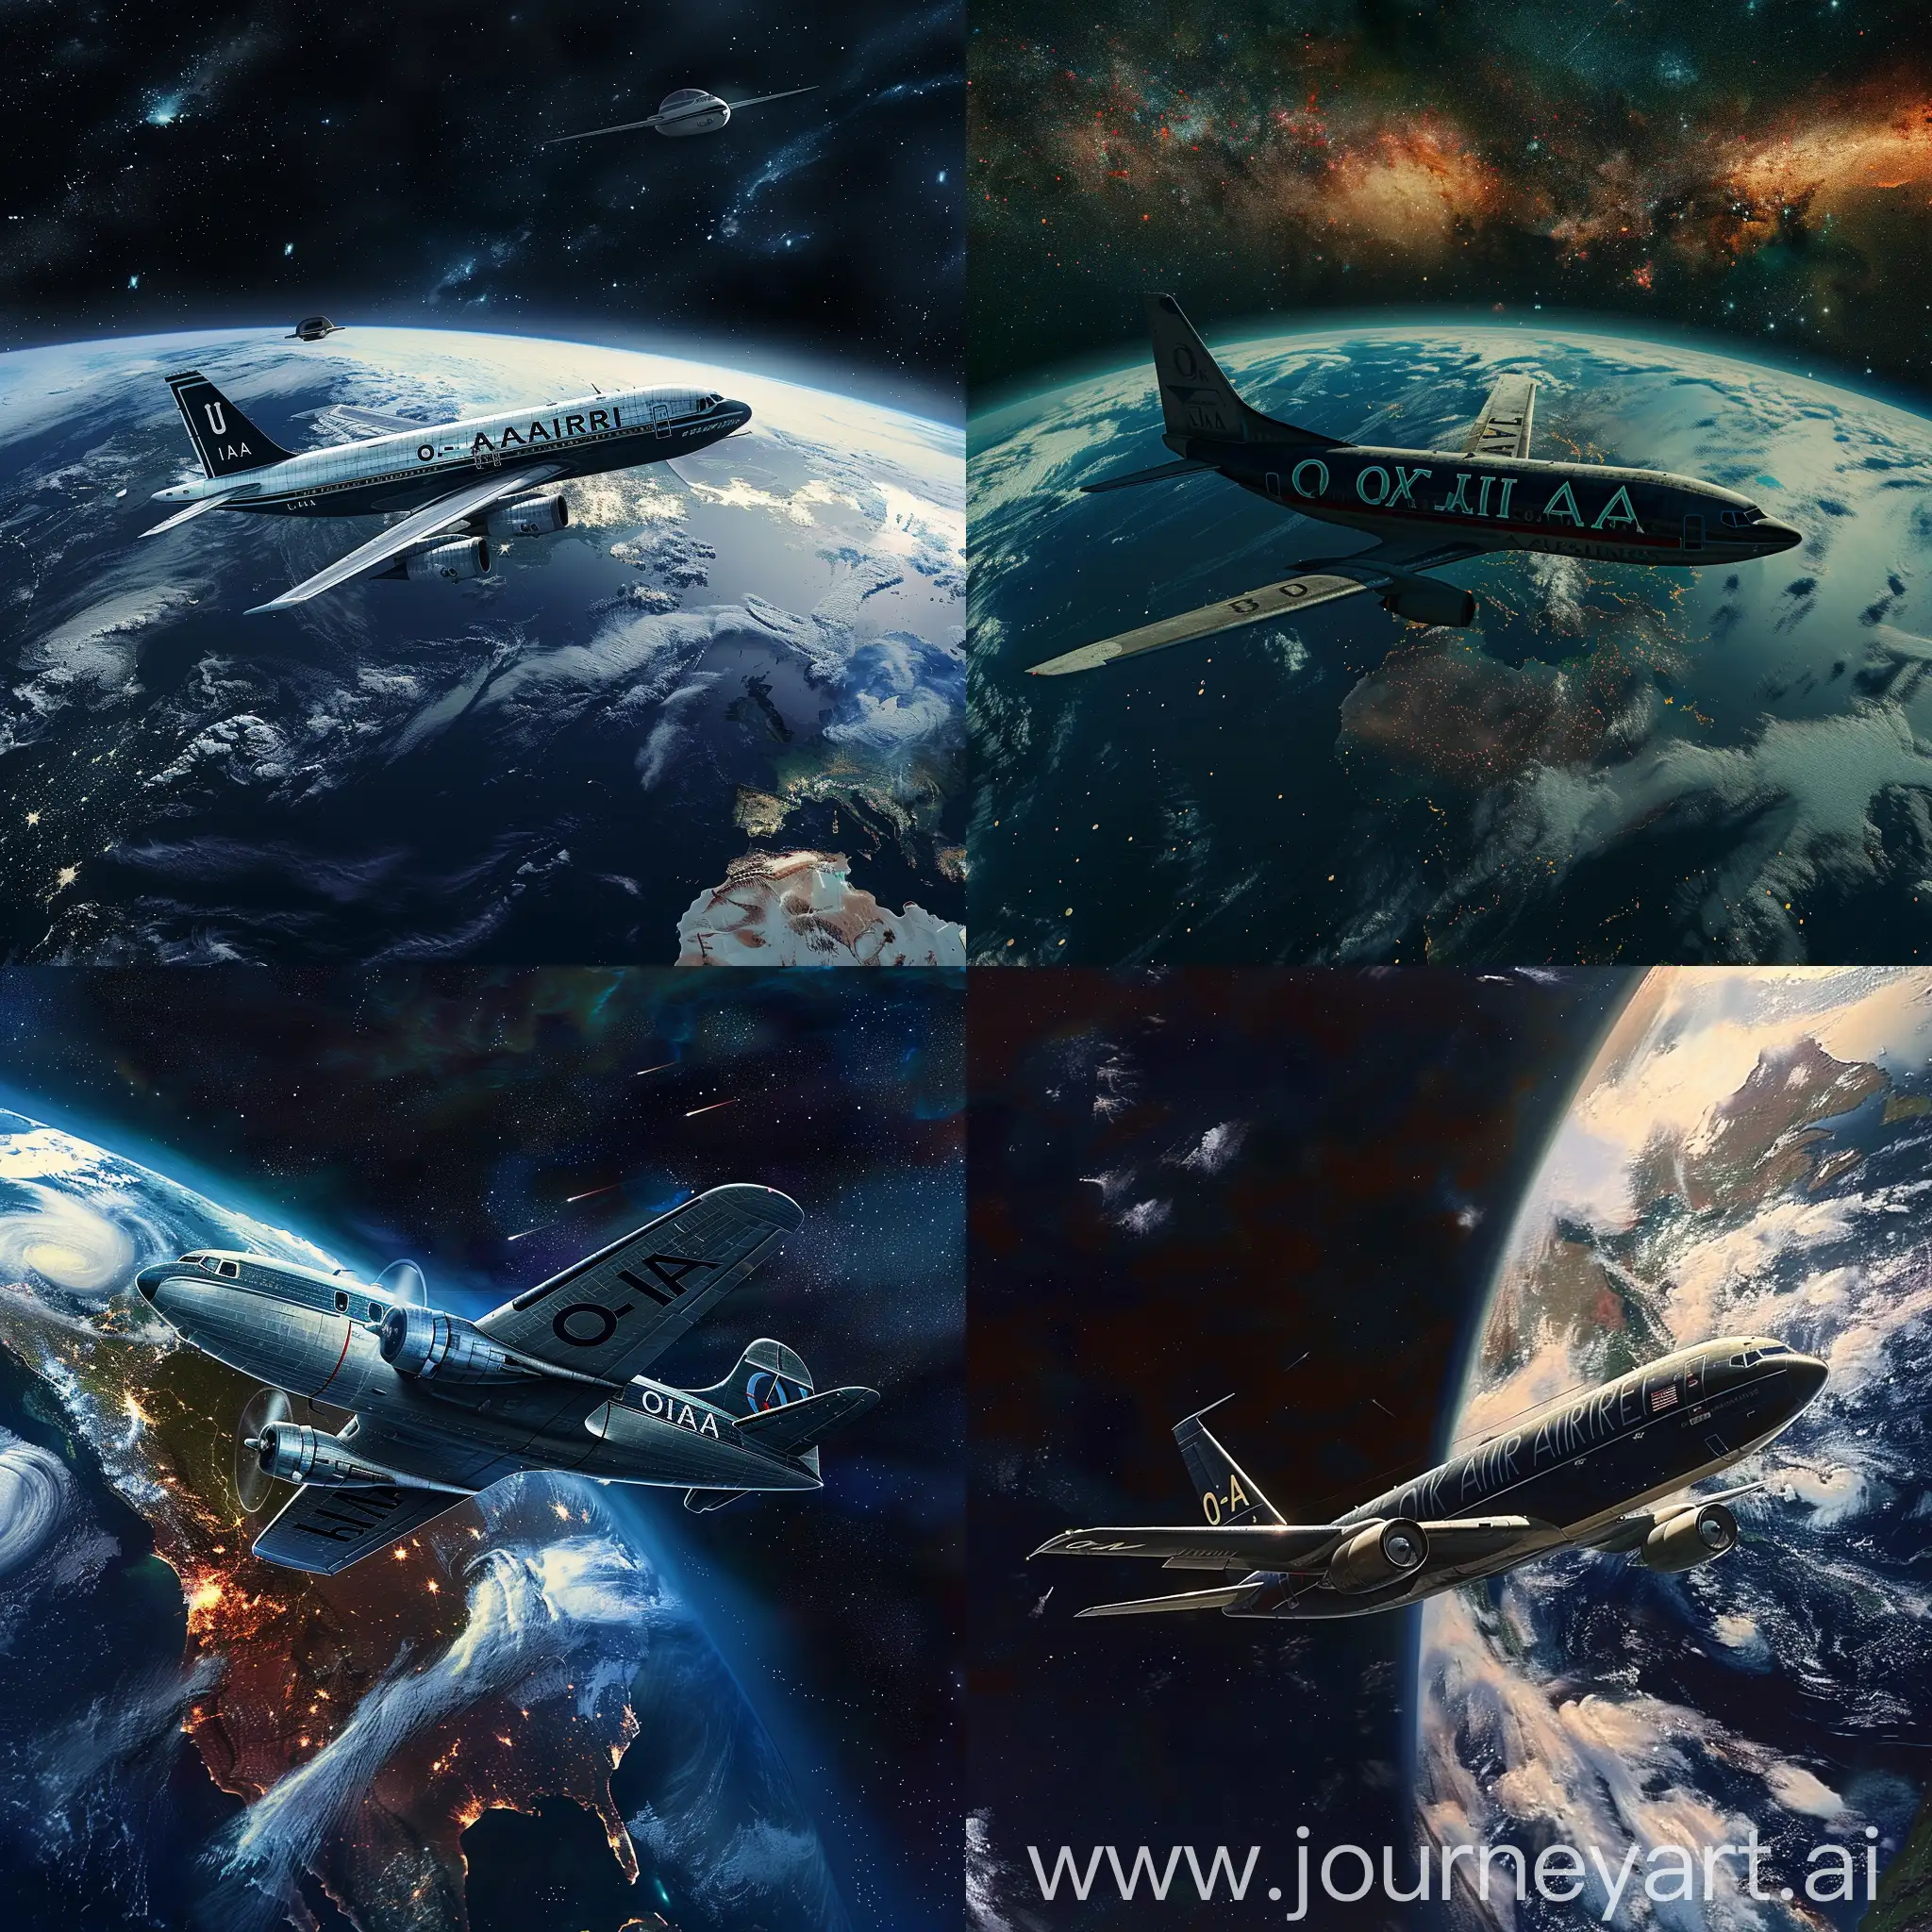 Please create an airplane with the letters "O I A A Airlines" in dark blue letters on the side, flying around the Earth in the vastness of space